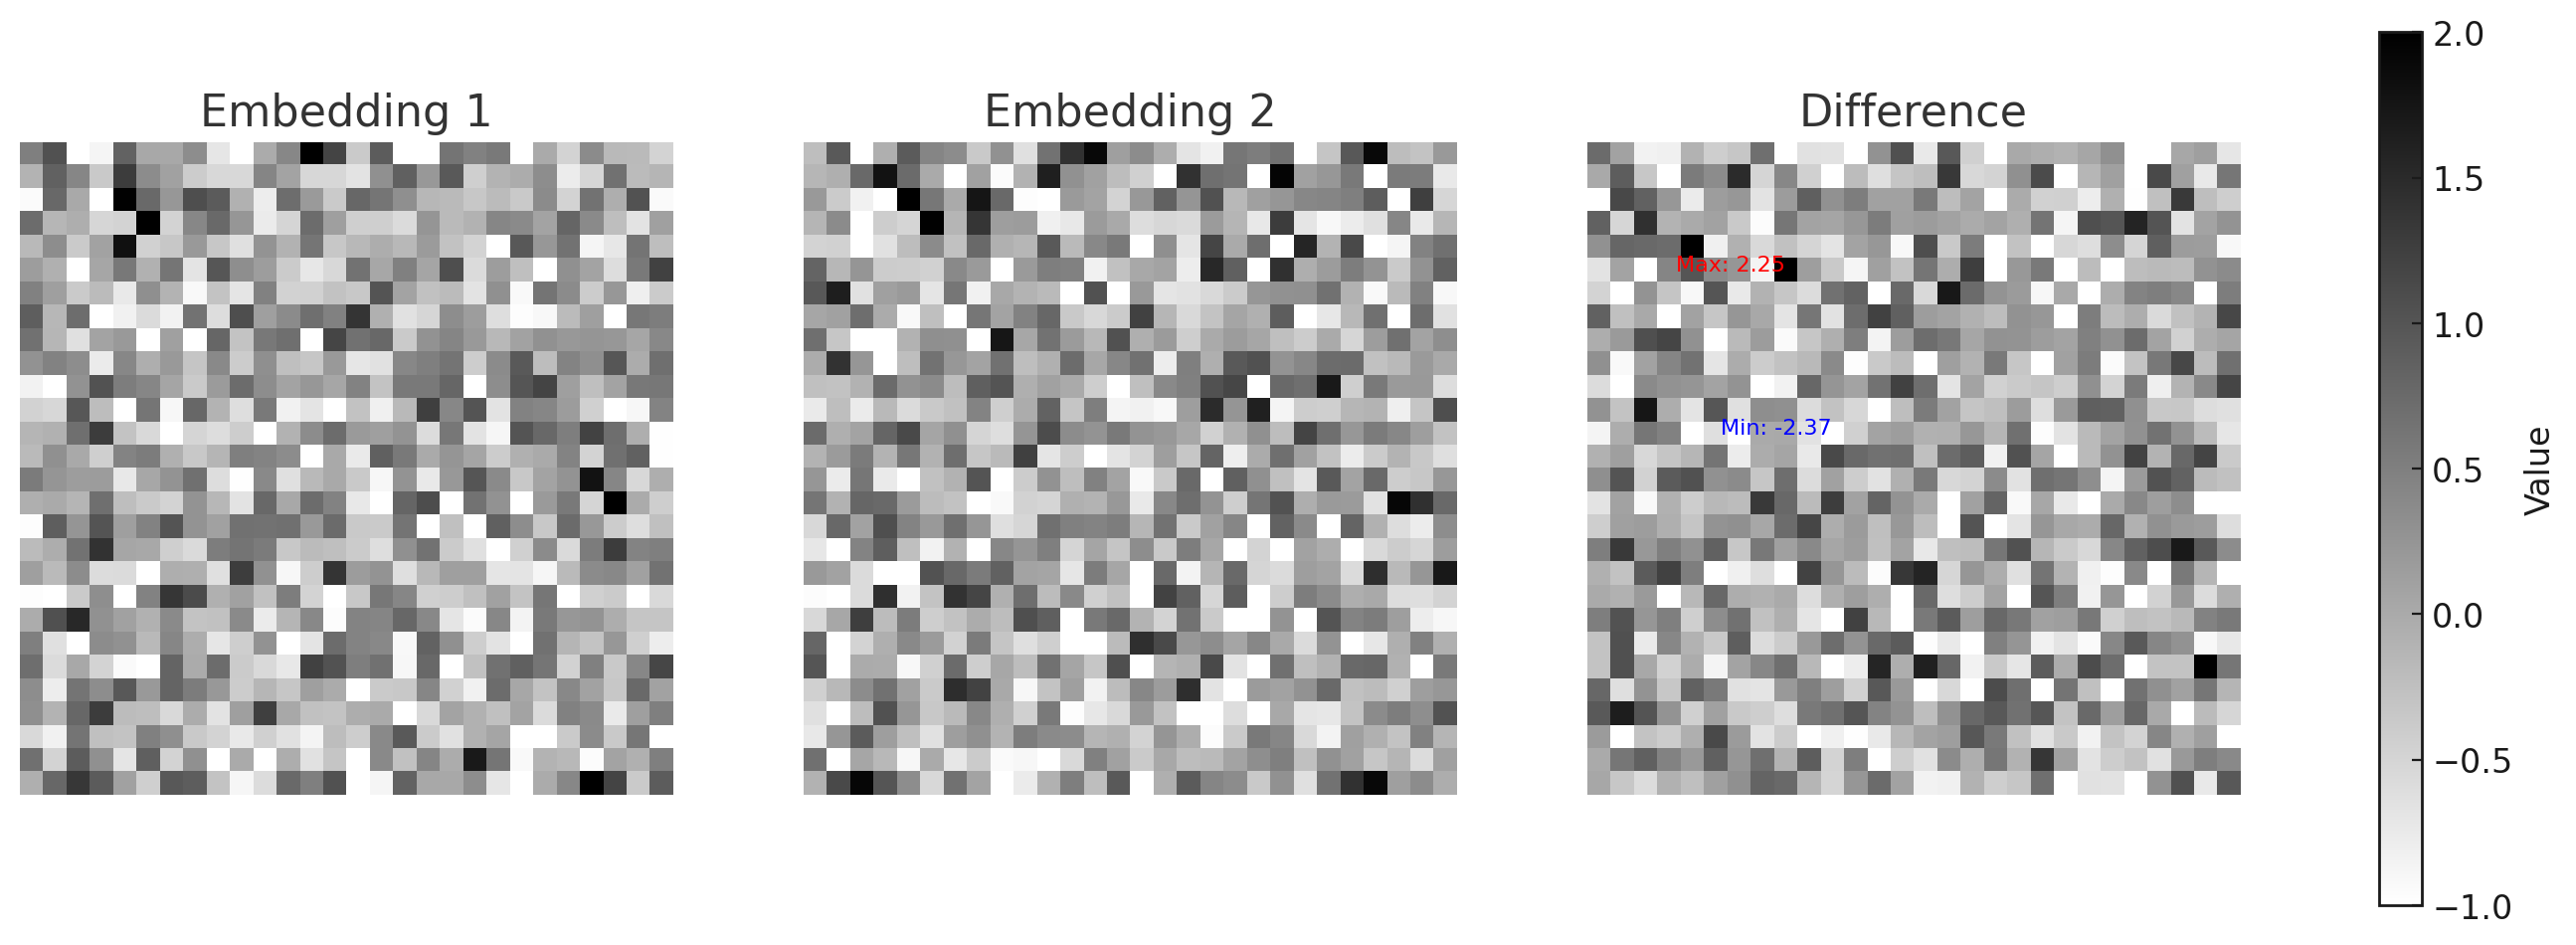 gray and white embeddings and diff heatmaps